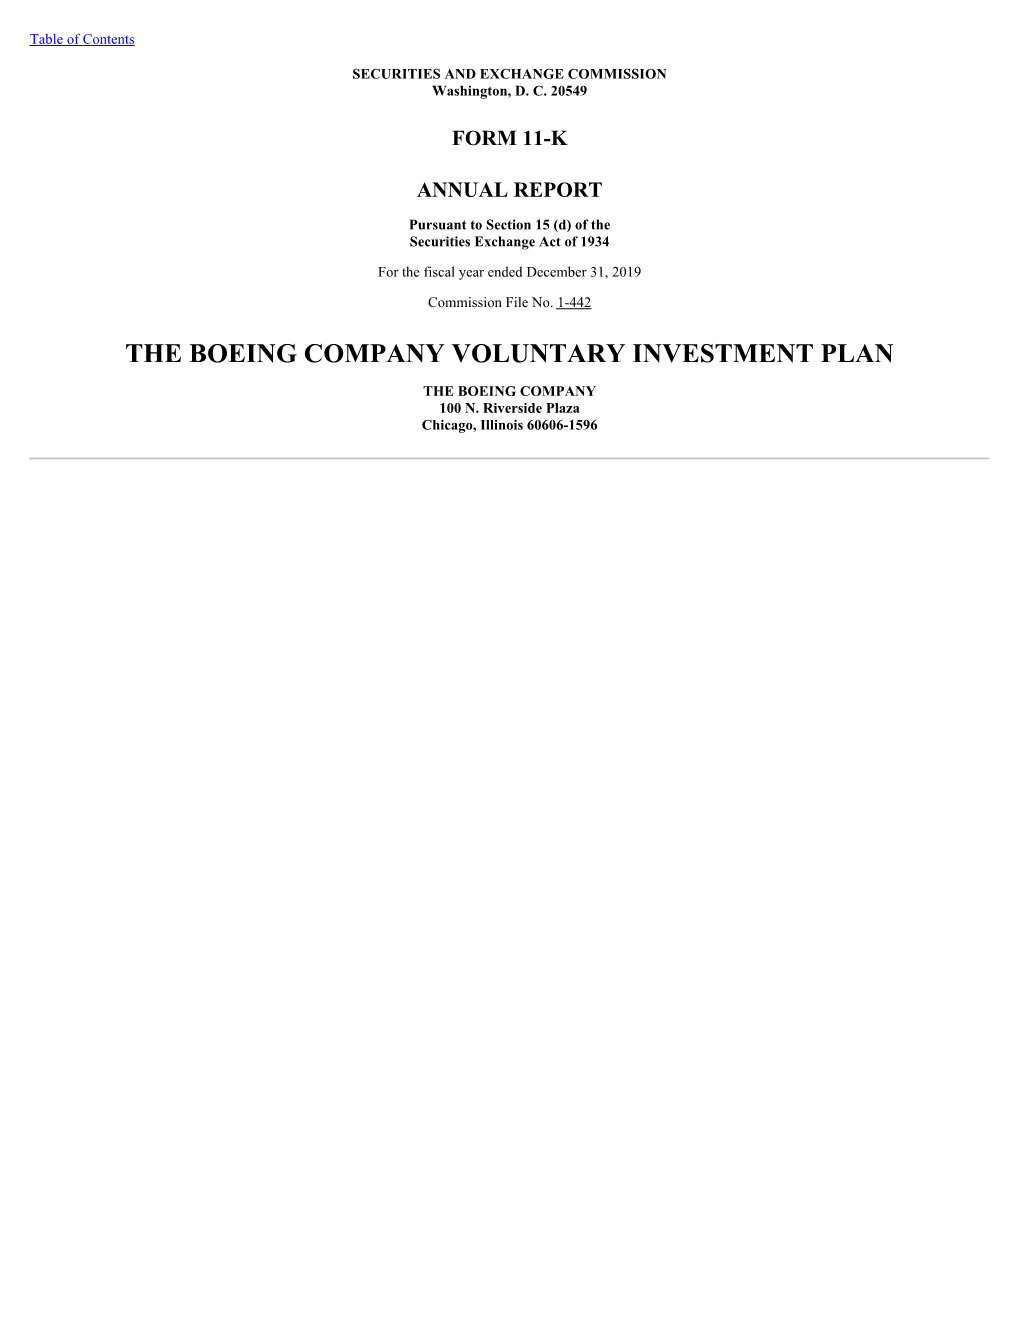 The Boeing Company Voluntary Investment Plan